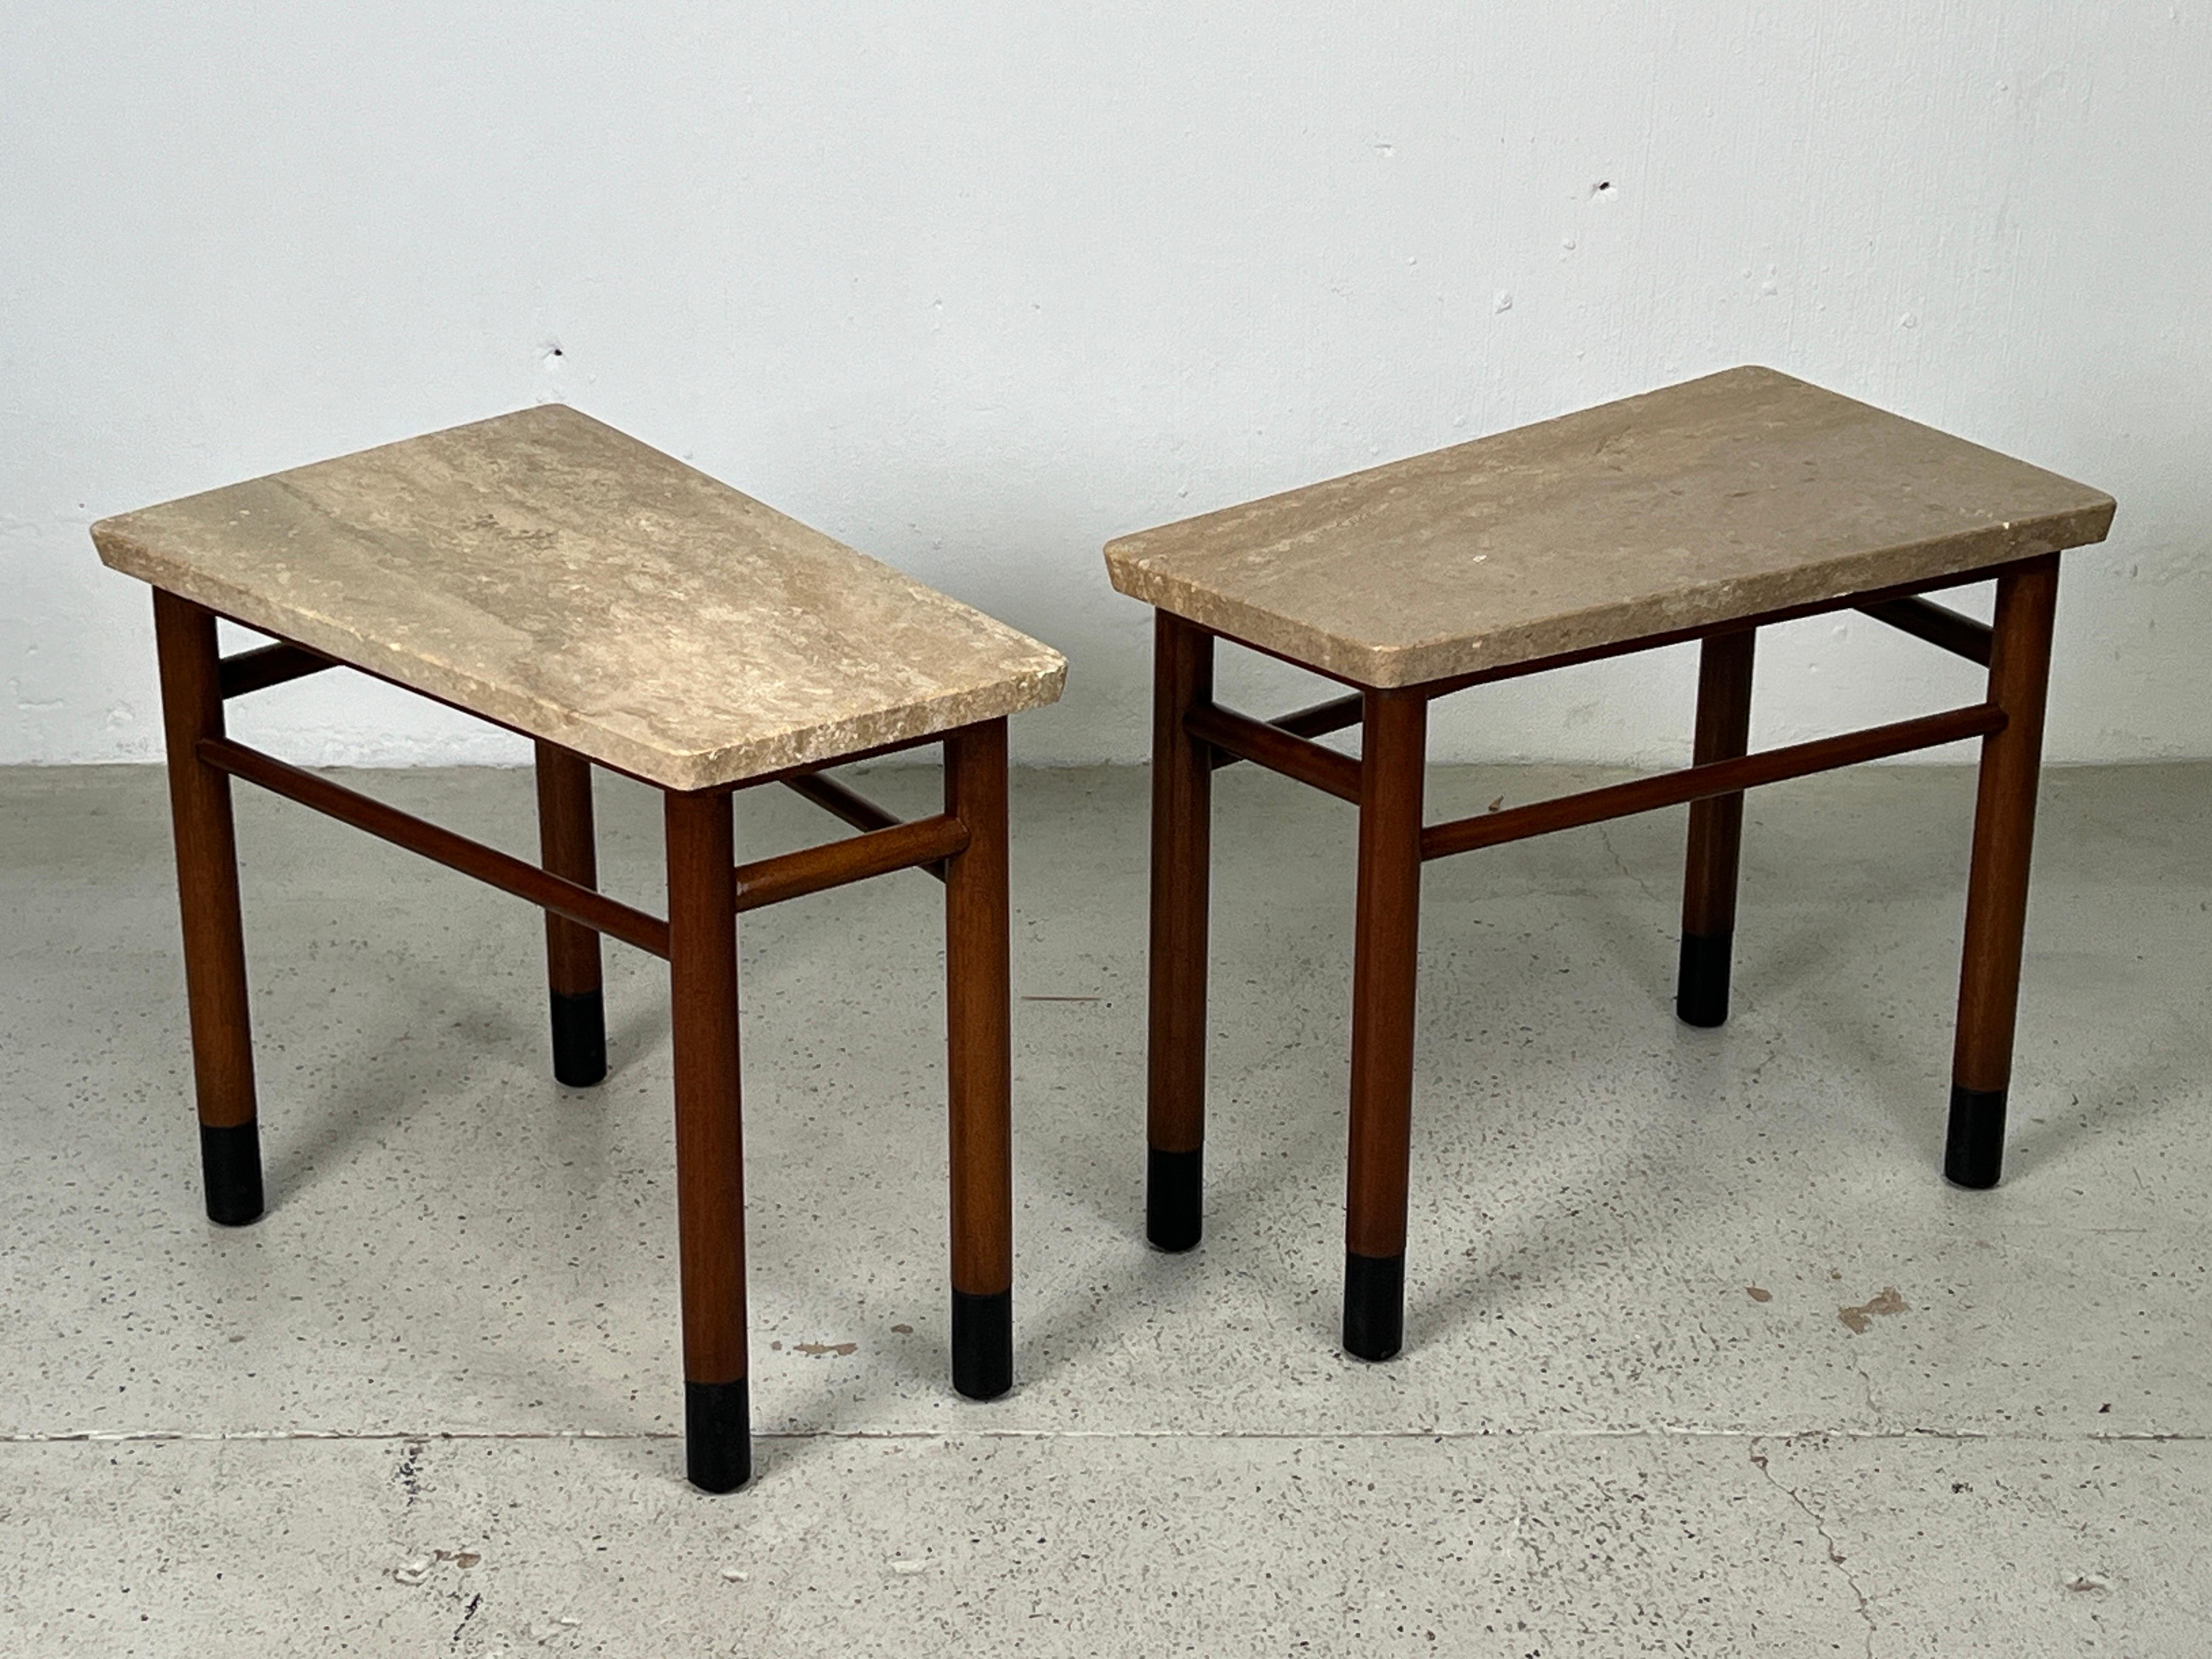 Pair of Wedge Shaped Travertine Tables by Edward Wormley for Dunbar For Sale 11